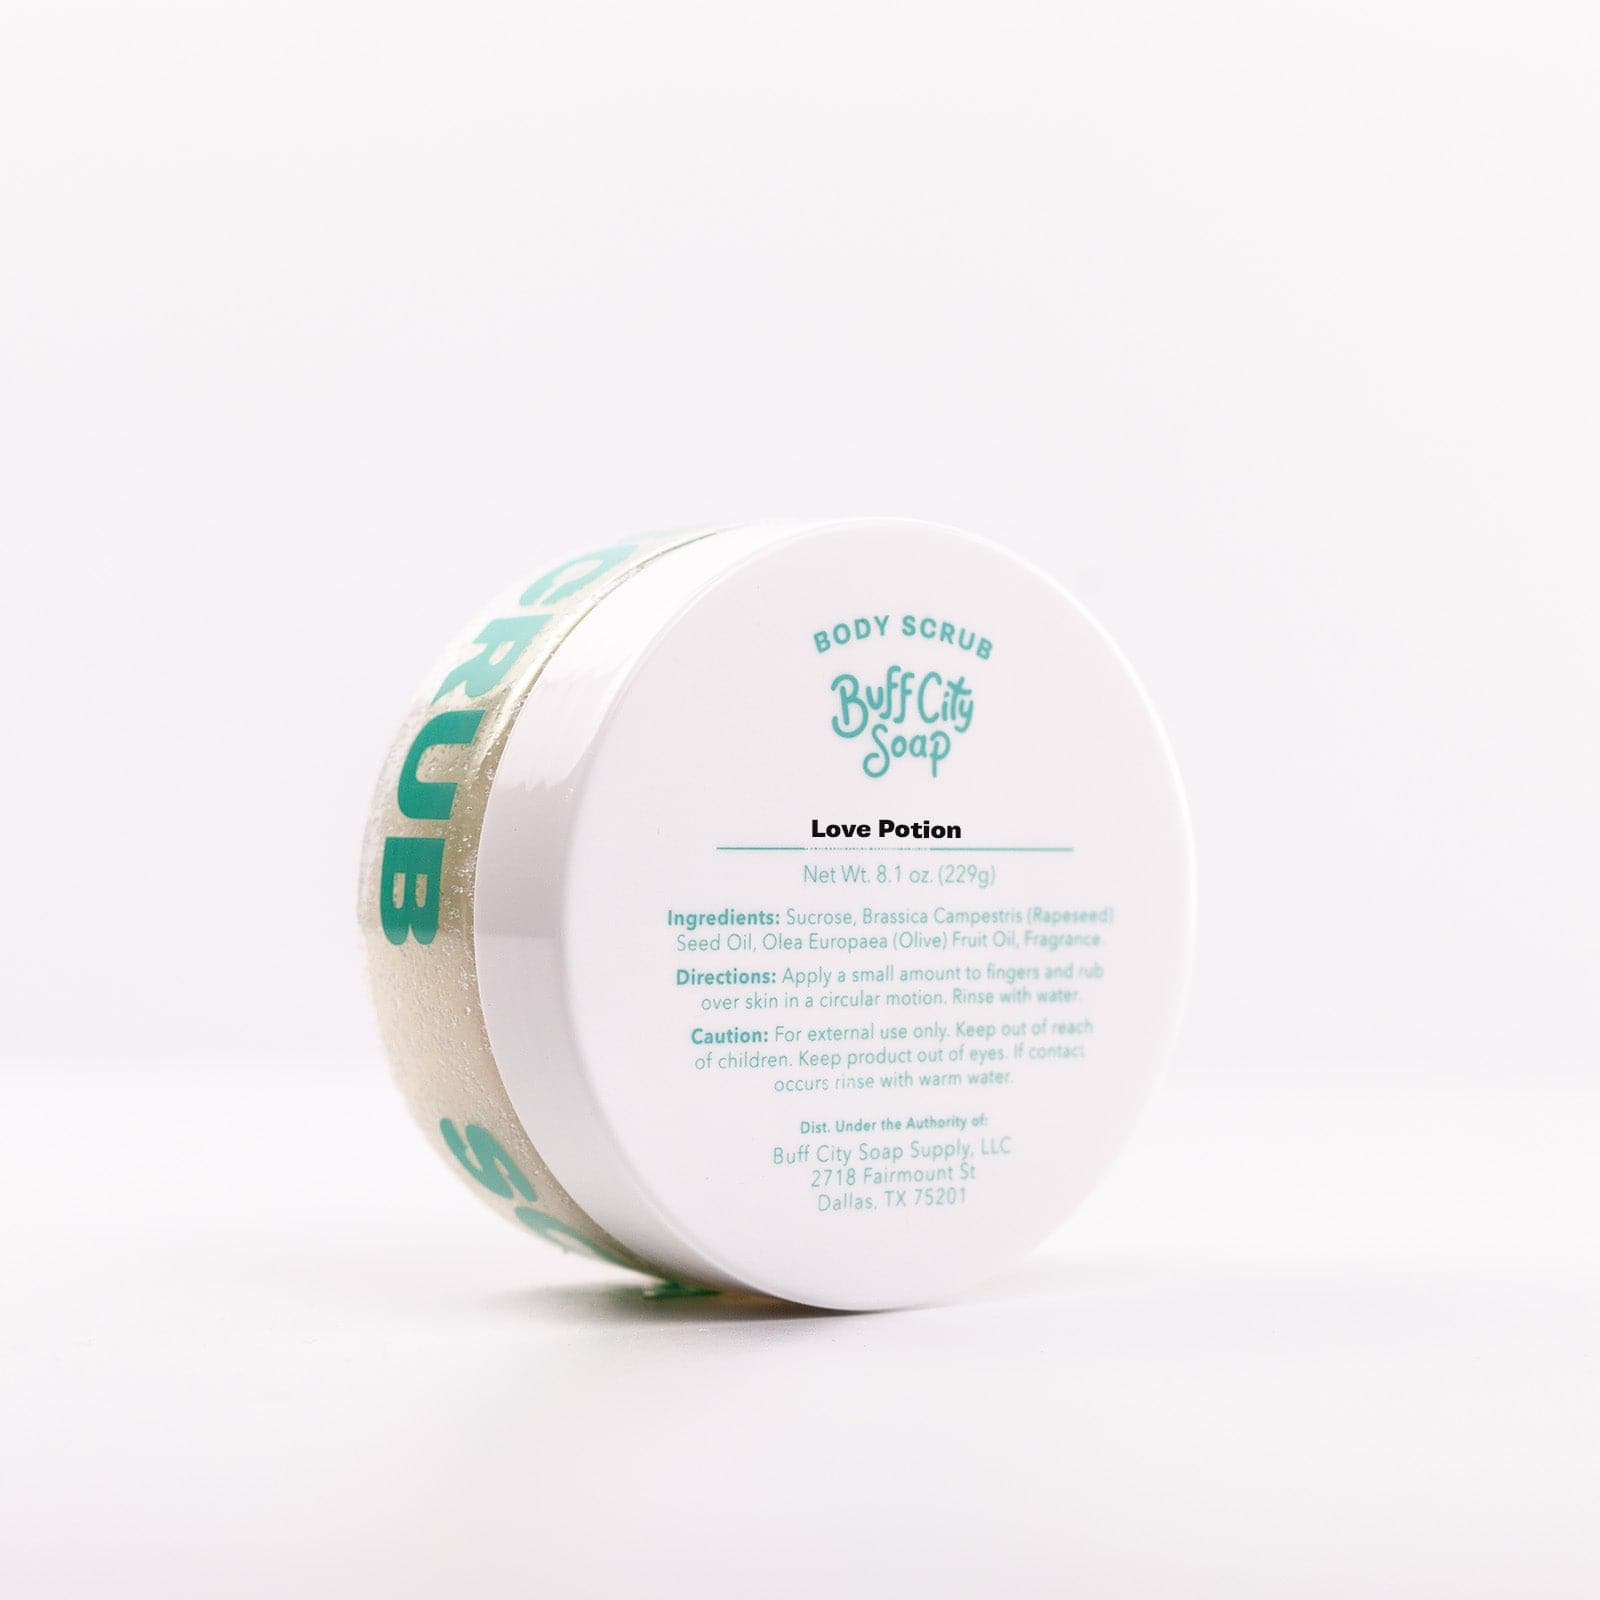 Top of Buff City Soap's love potion body scrub listing directions, ingredients, and cautions